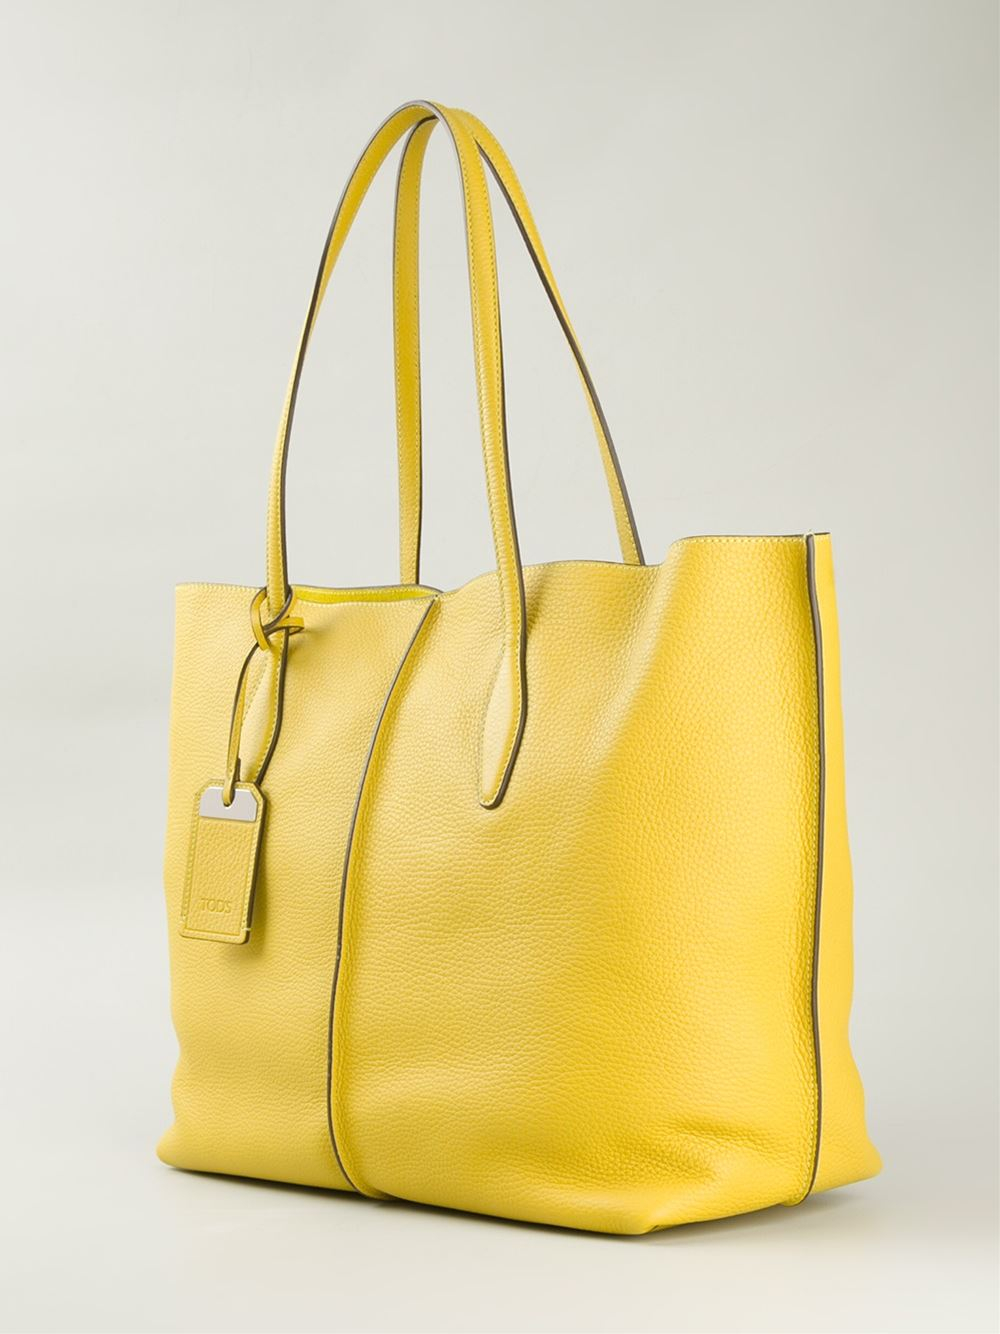 Lyst - Tod'S 'Joy' Tote Bag in Yellow